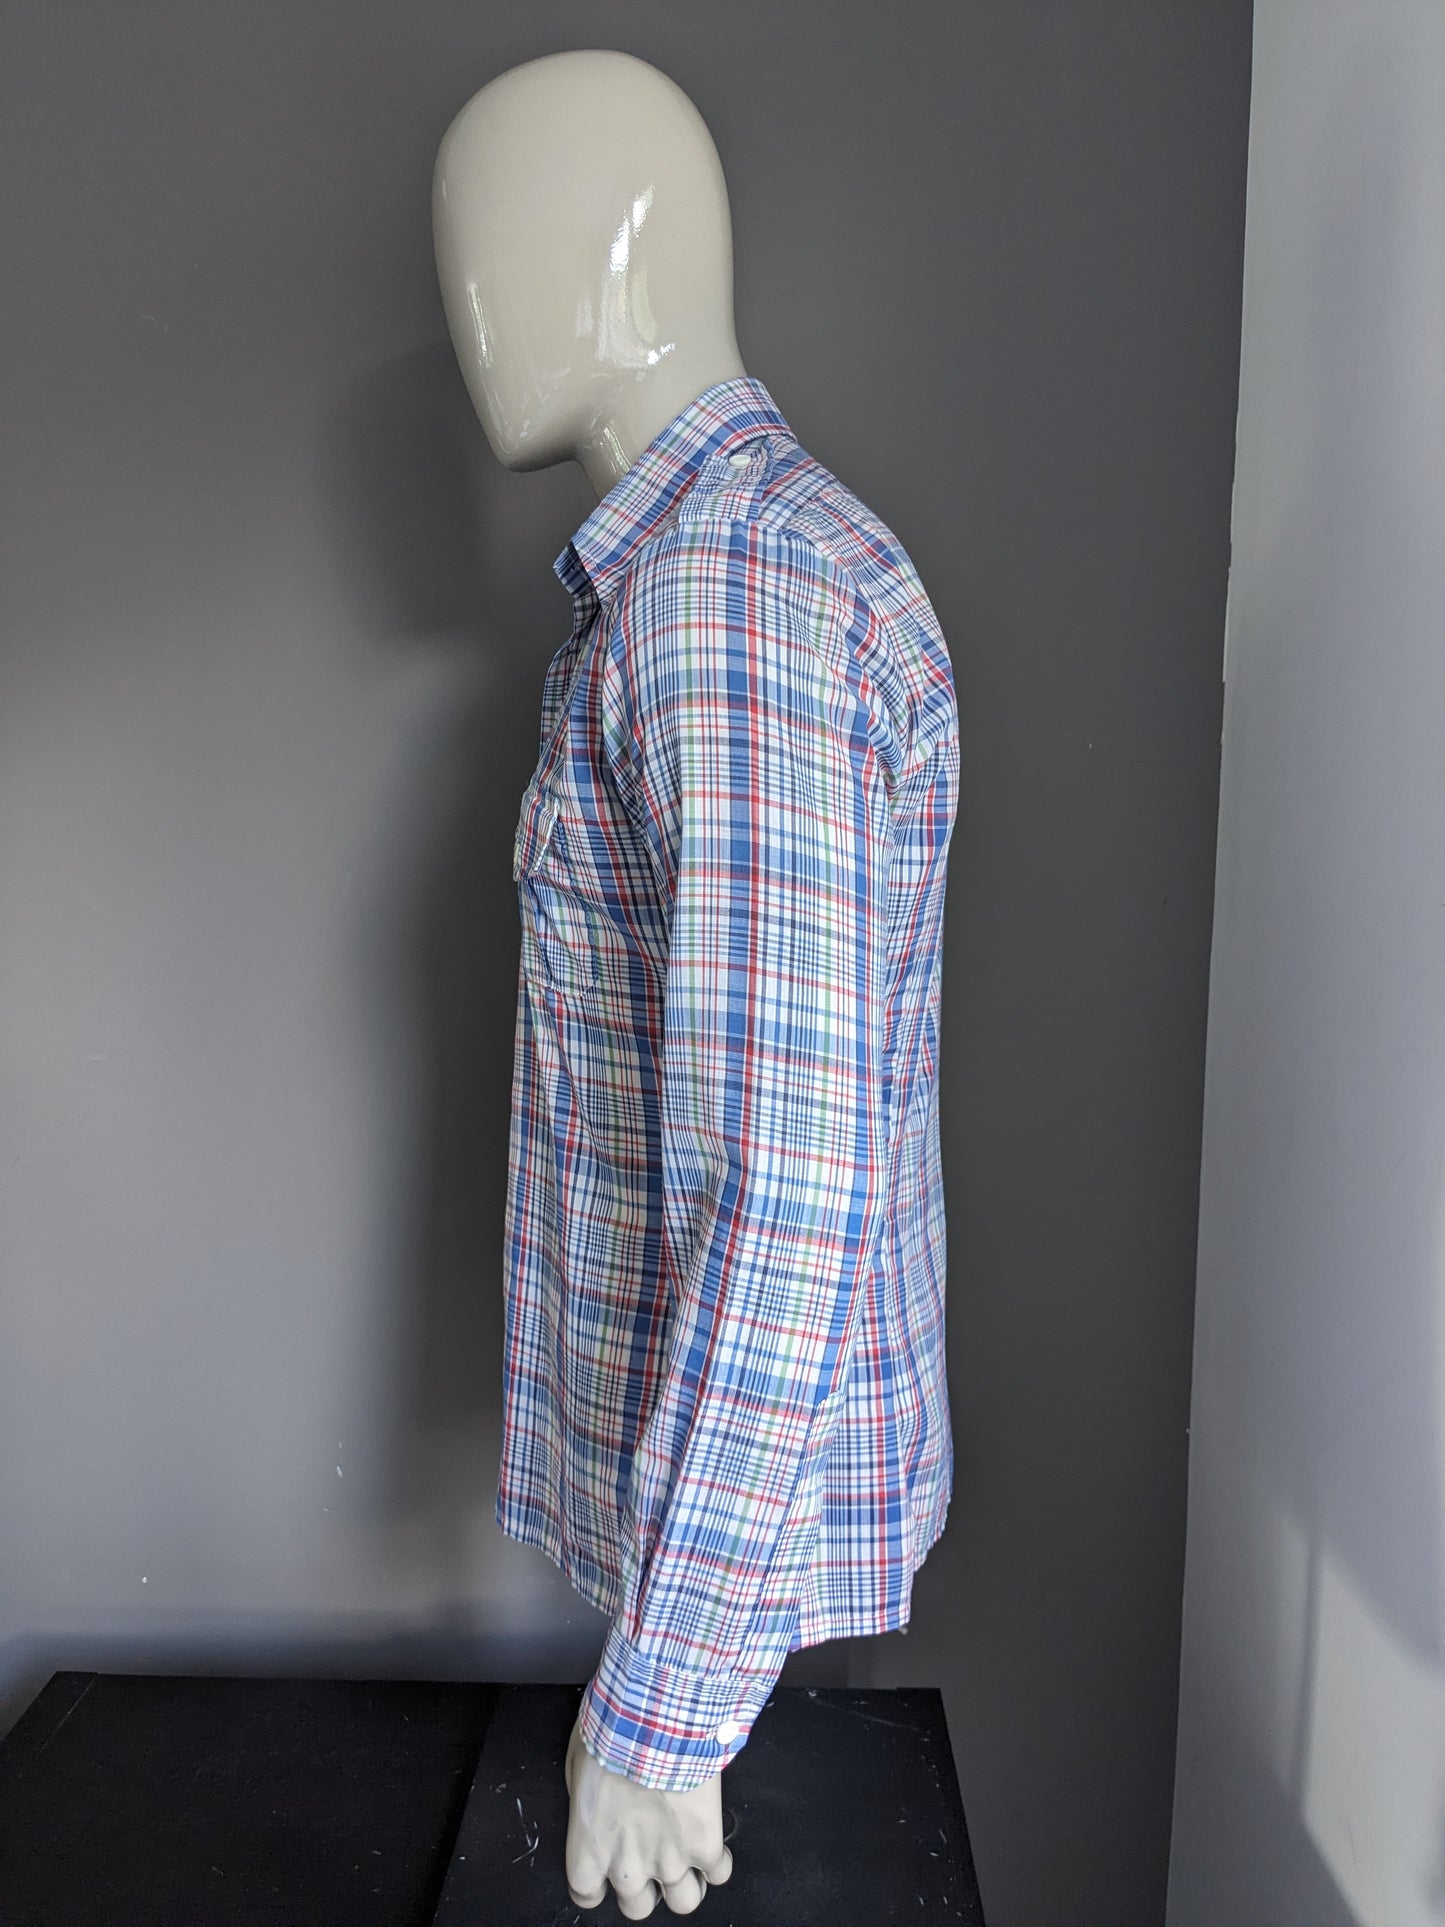 Vintage 70's Lee Cooper shirt with point collar. Blue red green checkered. Size L.